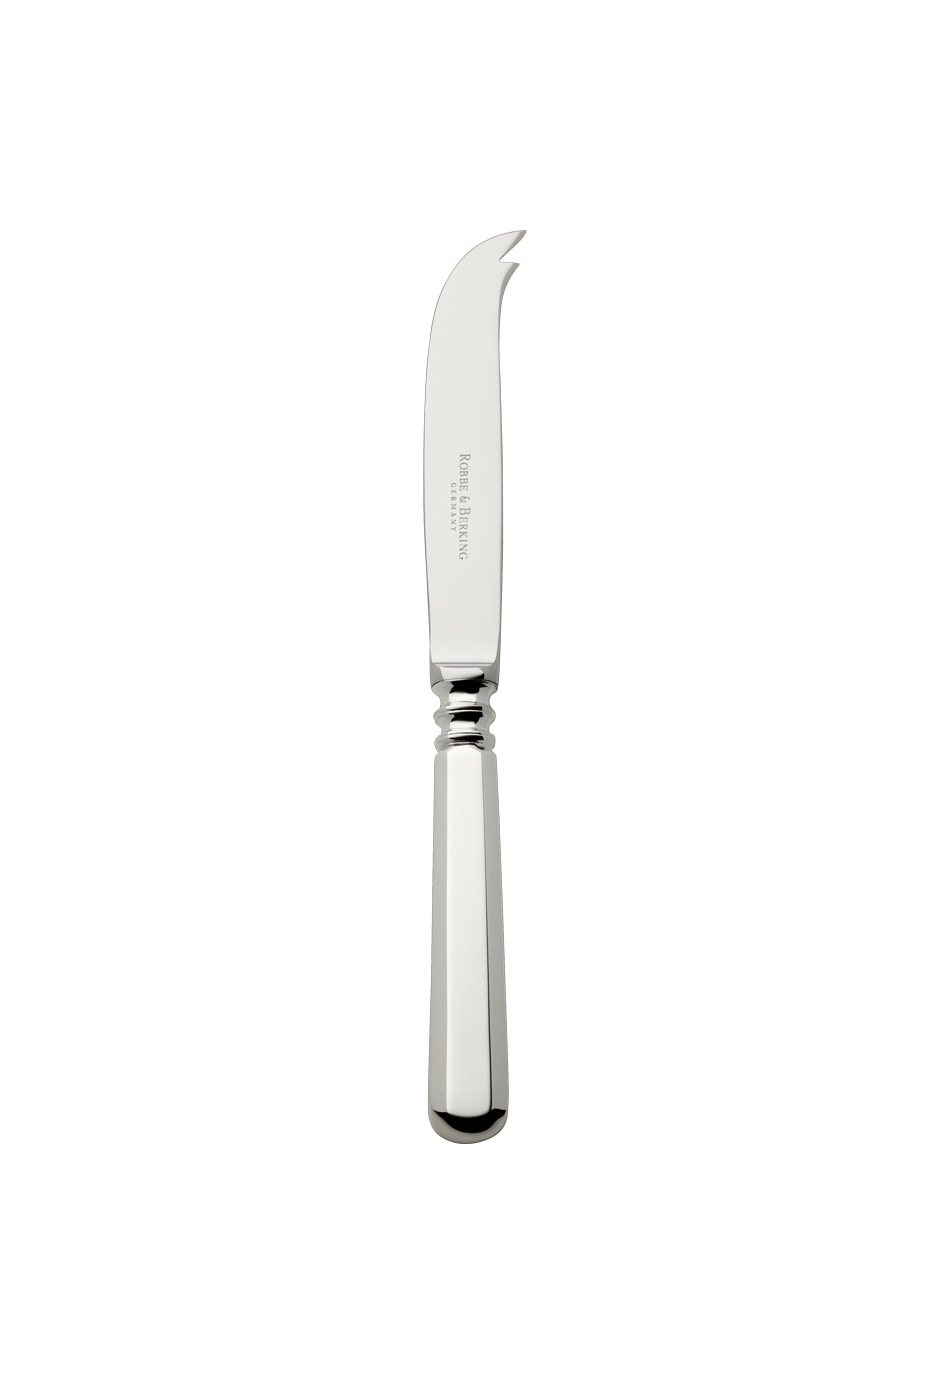 Alt-Spaten Cheese Knife (925 Sterling Silver)